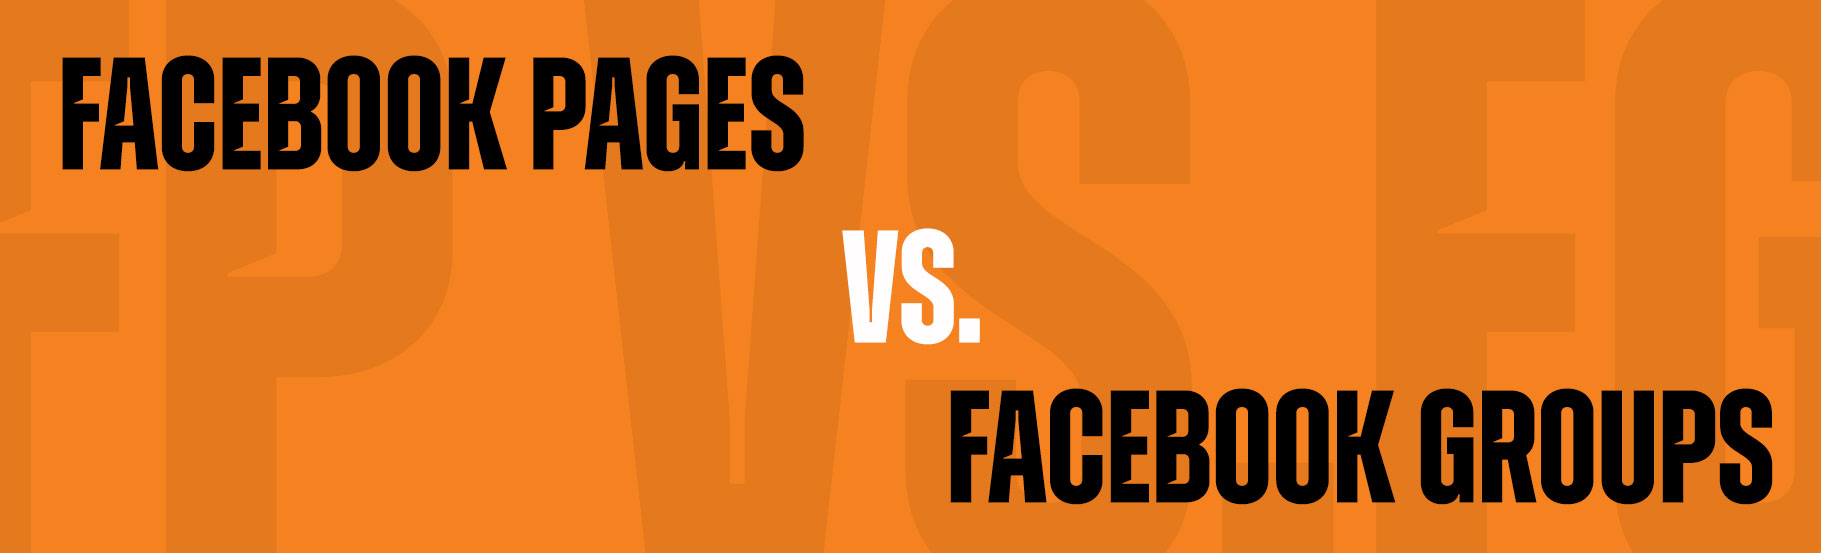 Facebook pages VS Facebook groups